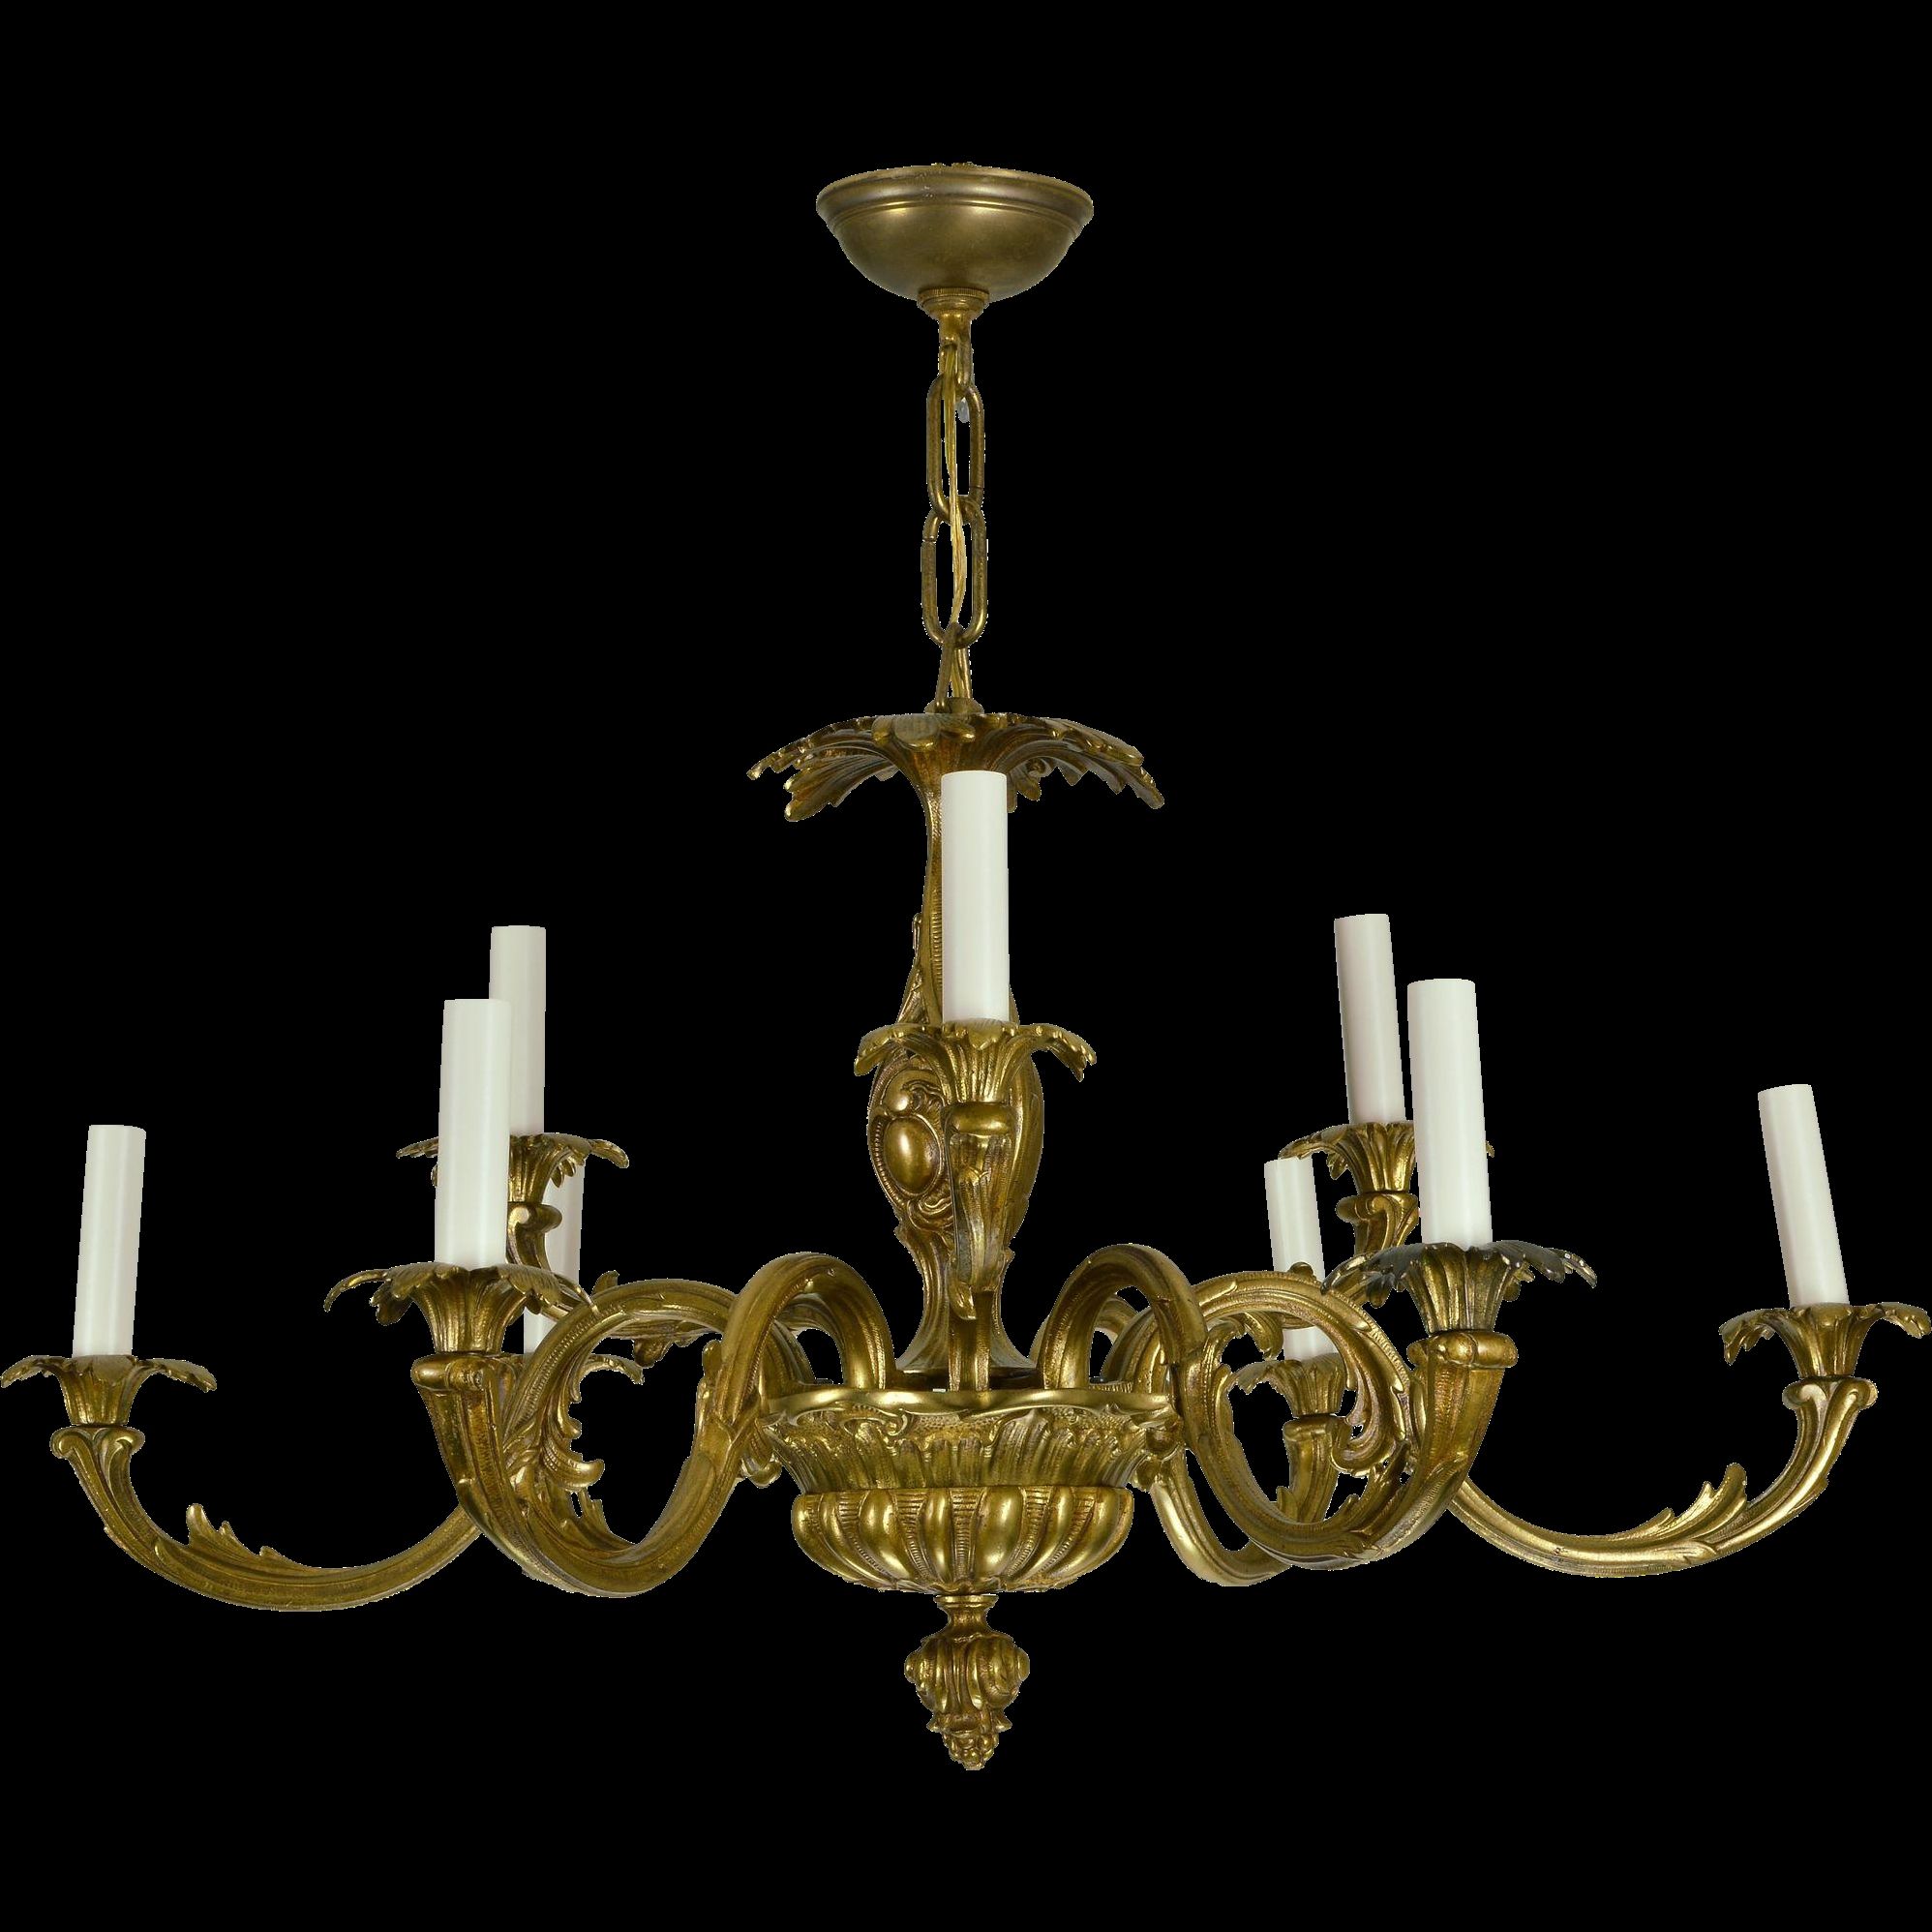 Vintage Brass French Baroque Chandelier From Tolw On Ru Lane Within Vintage Brass Chandeliers (View 7 of 12)